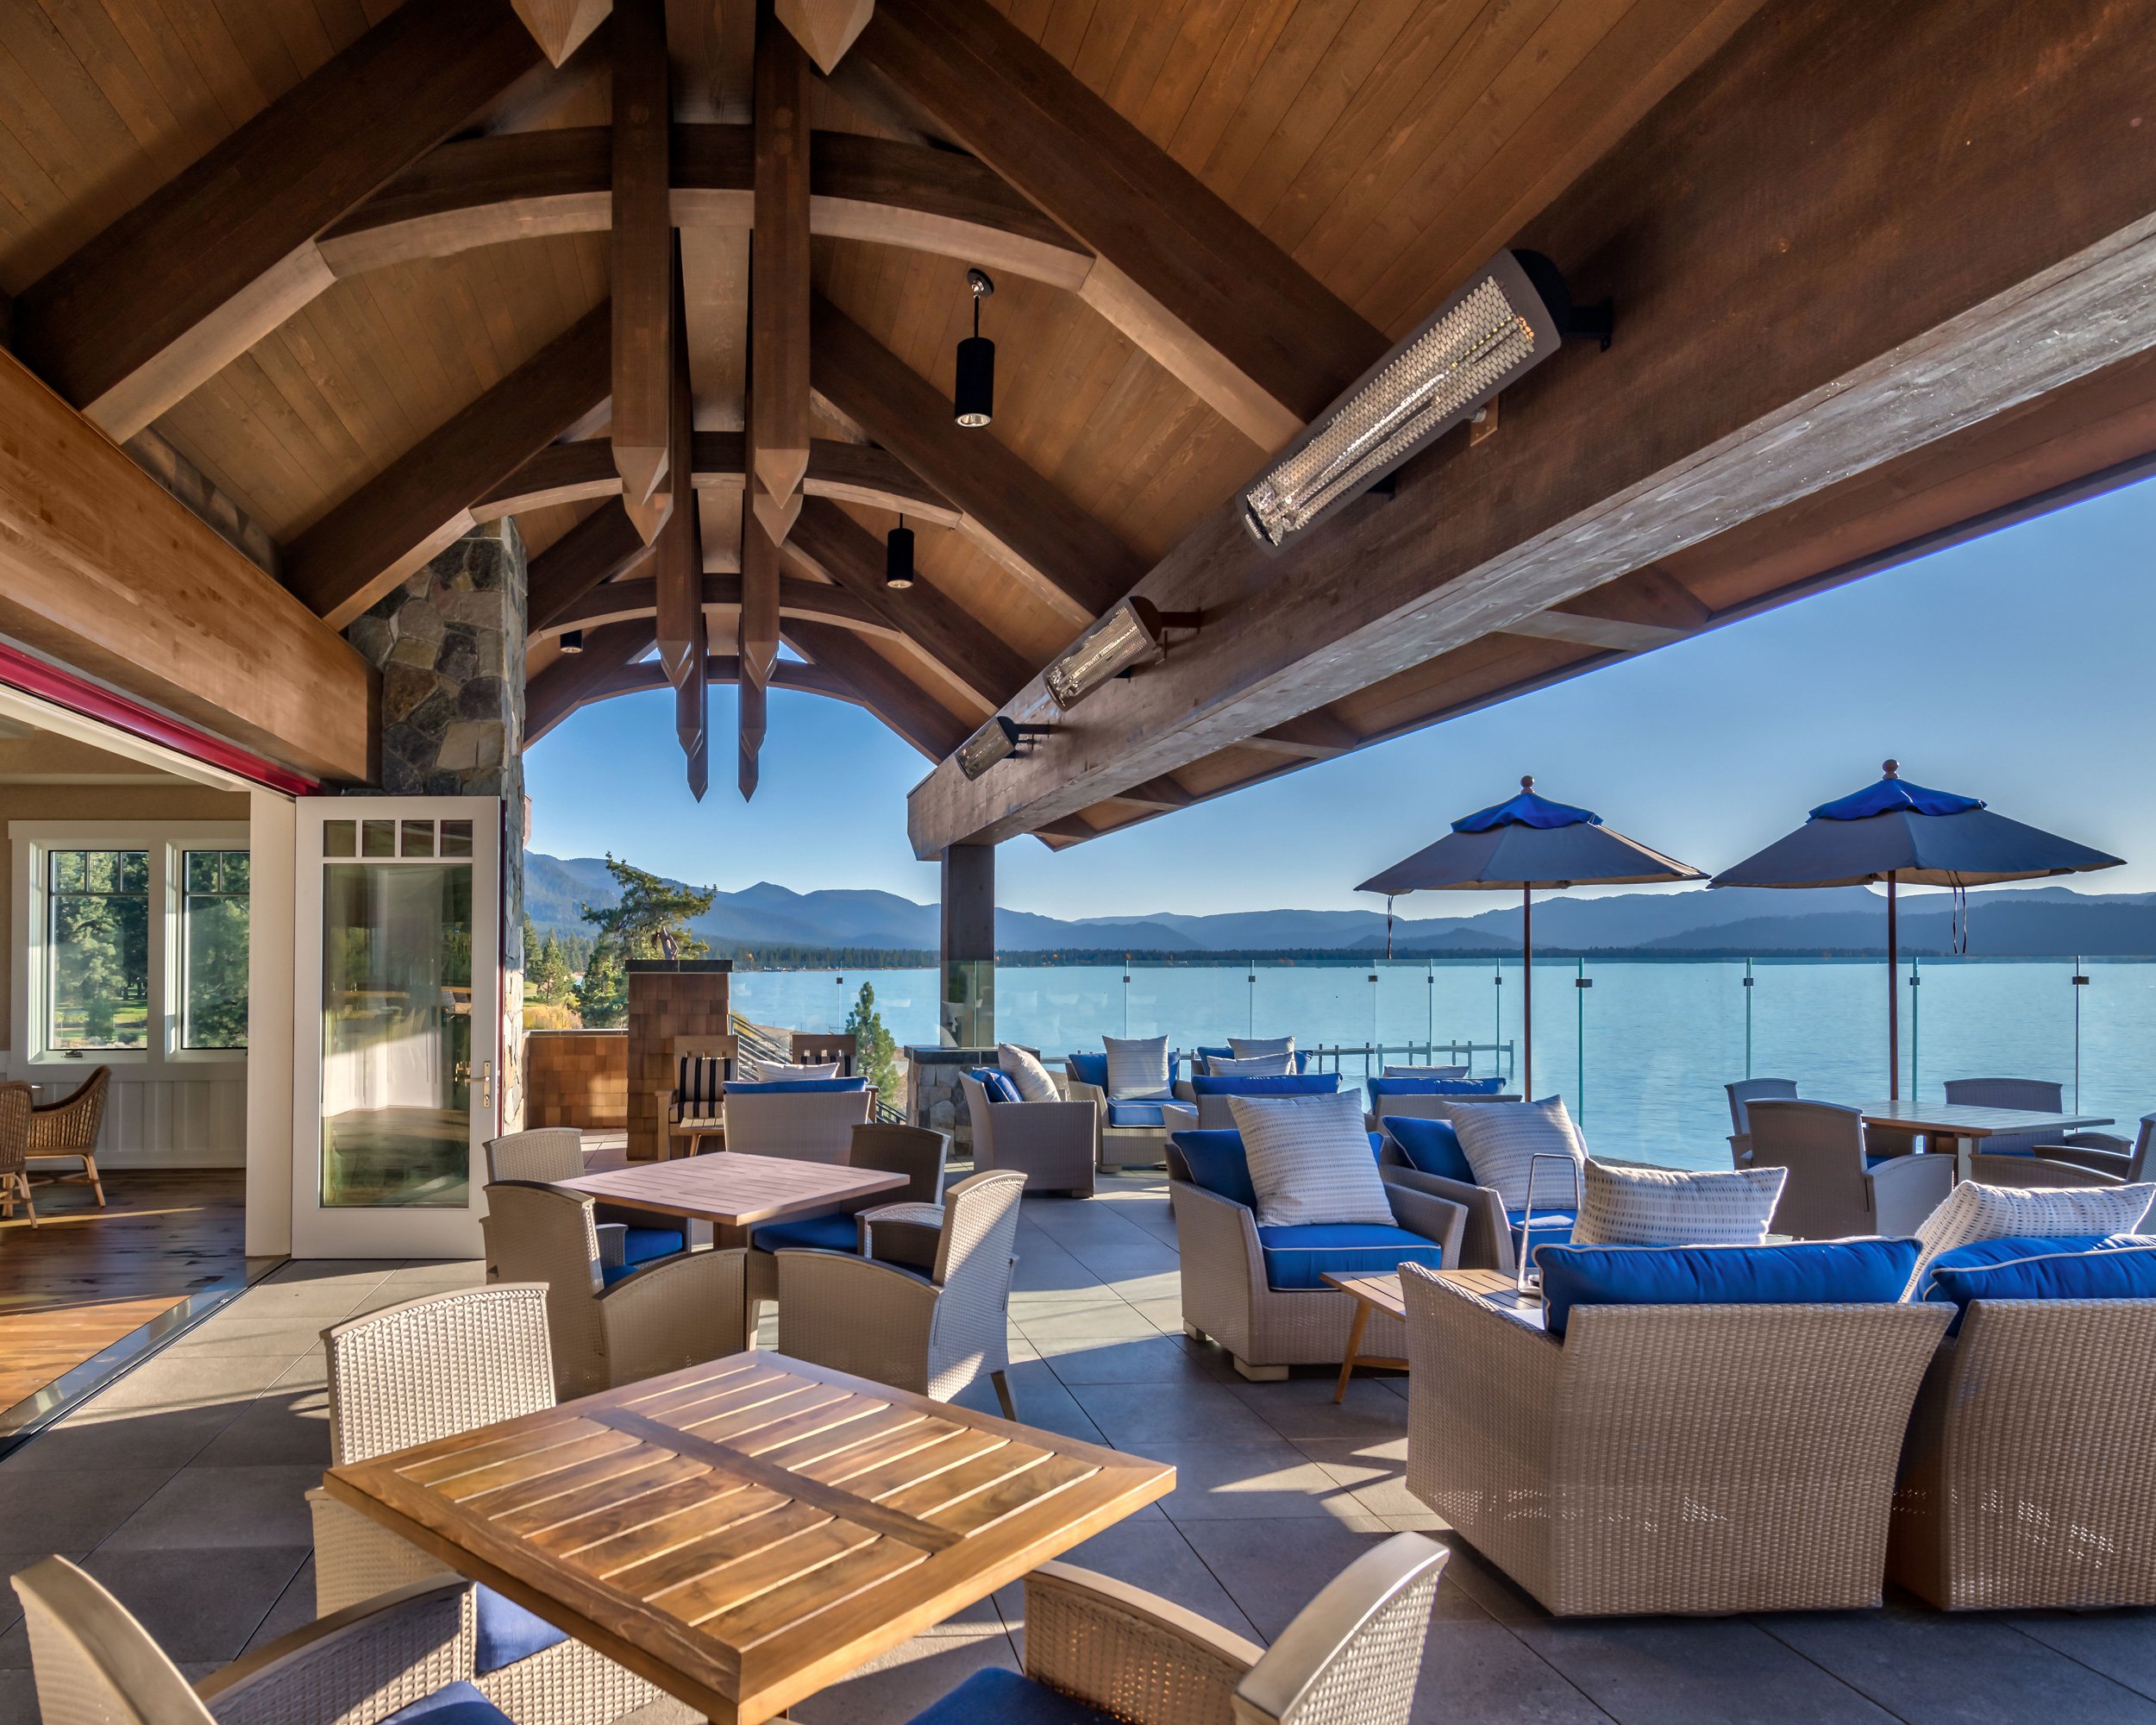 Tahoe Beach Club's serene lakefront patio with breathtaking view of the tranquil waters and surrounding nature. (Copy) (Copy) (Copy)